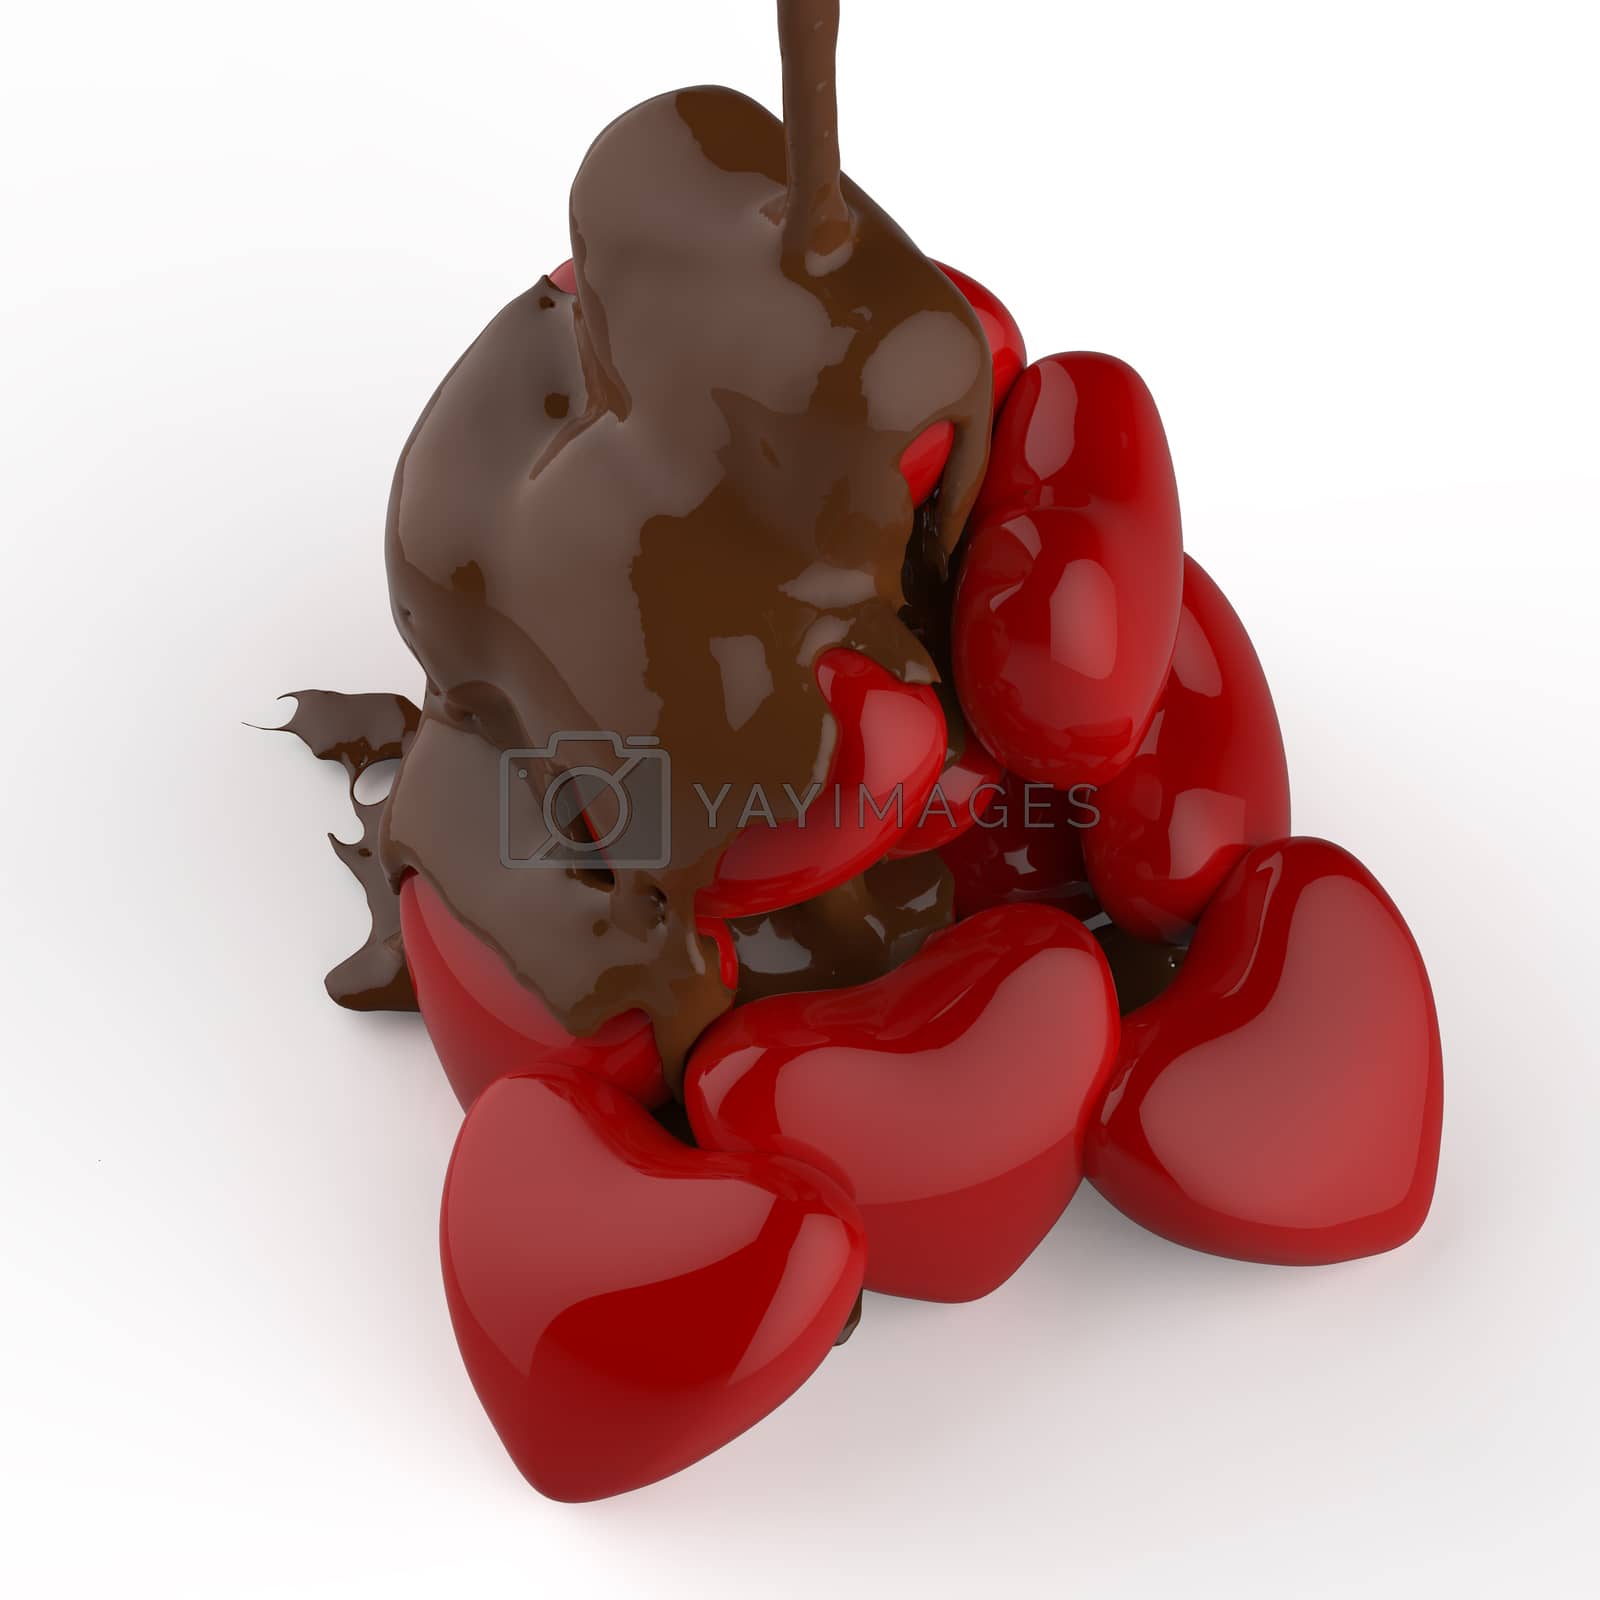 Royalty free image of close up chocolate syrup leaking over heart shape symbol  by everythingpossible